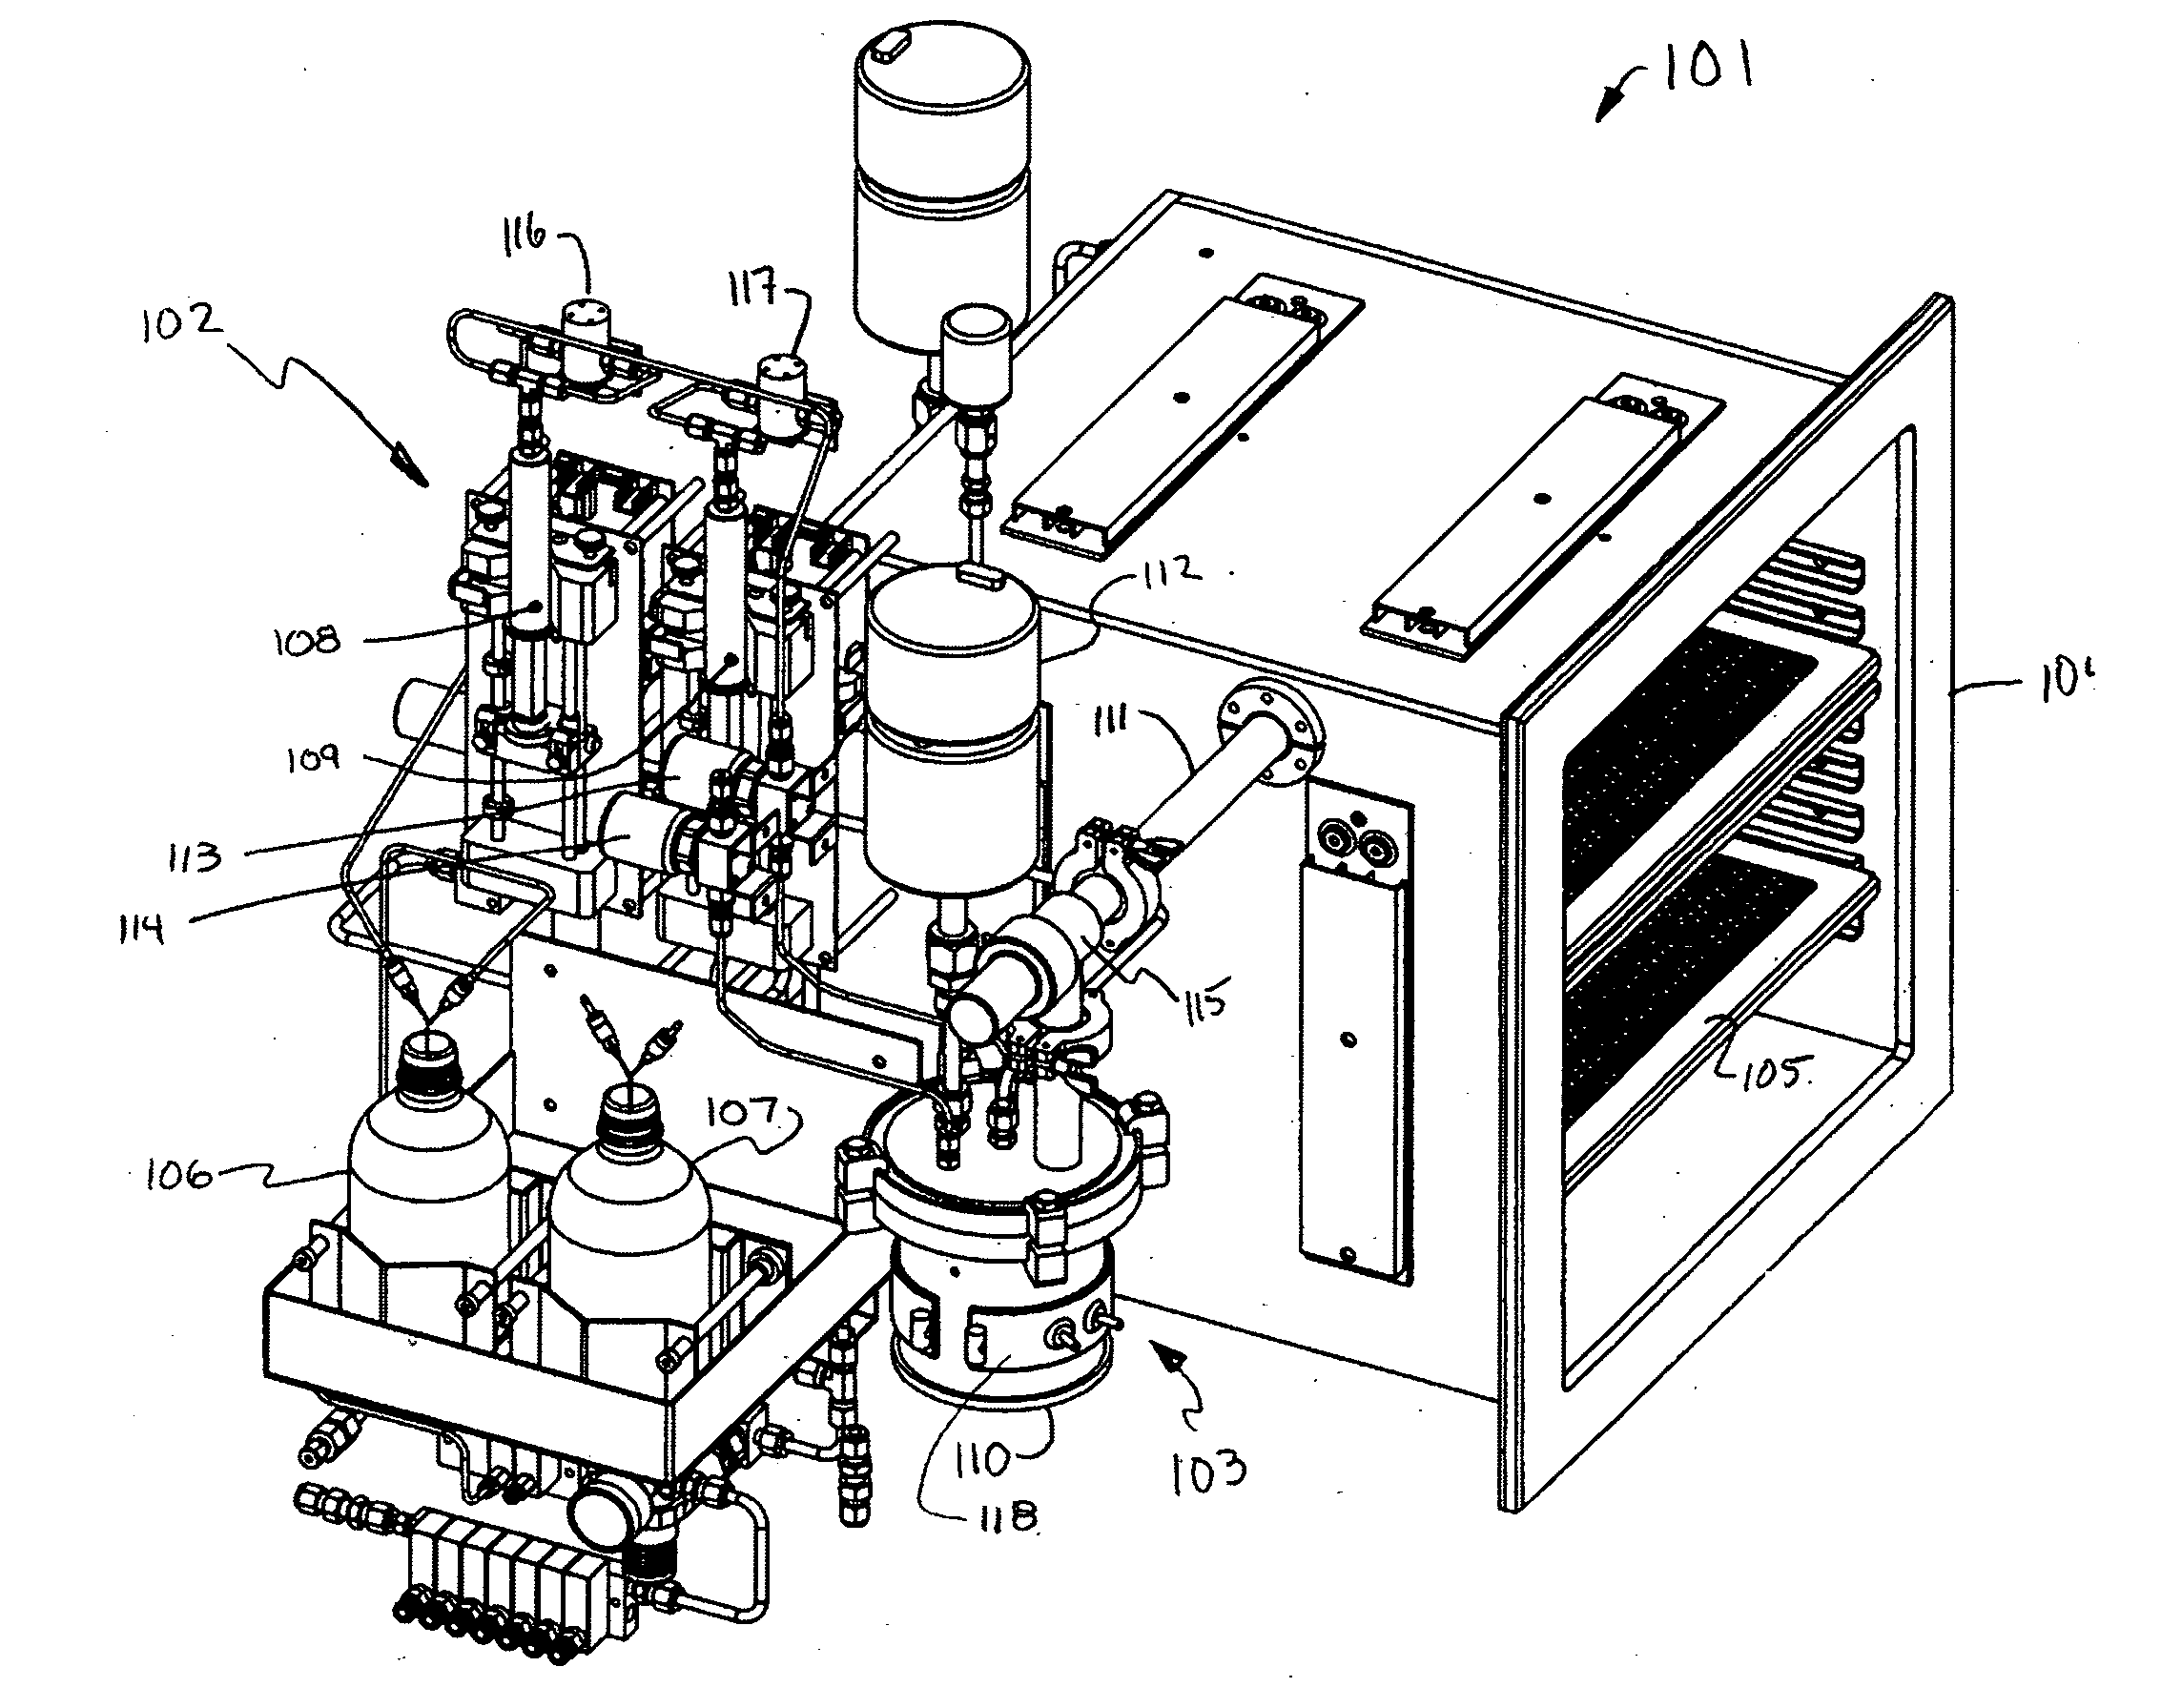 Silane process chamber with double door seal